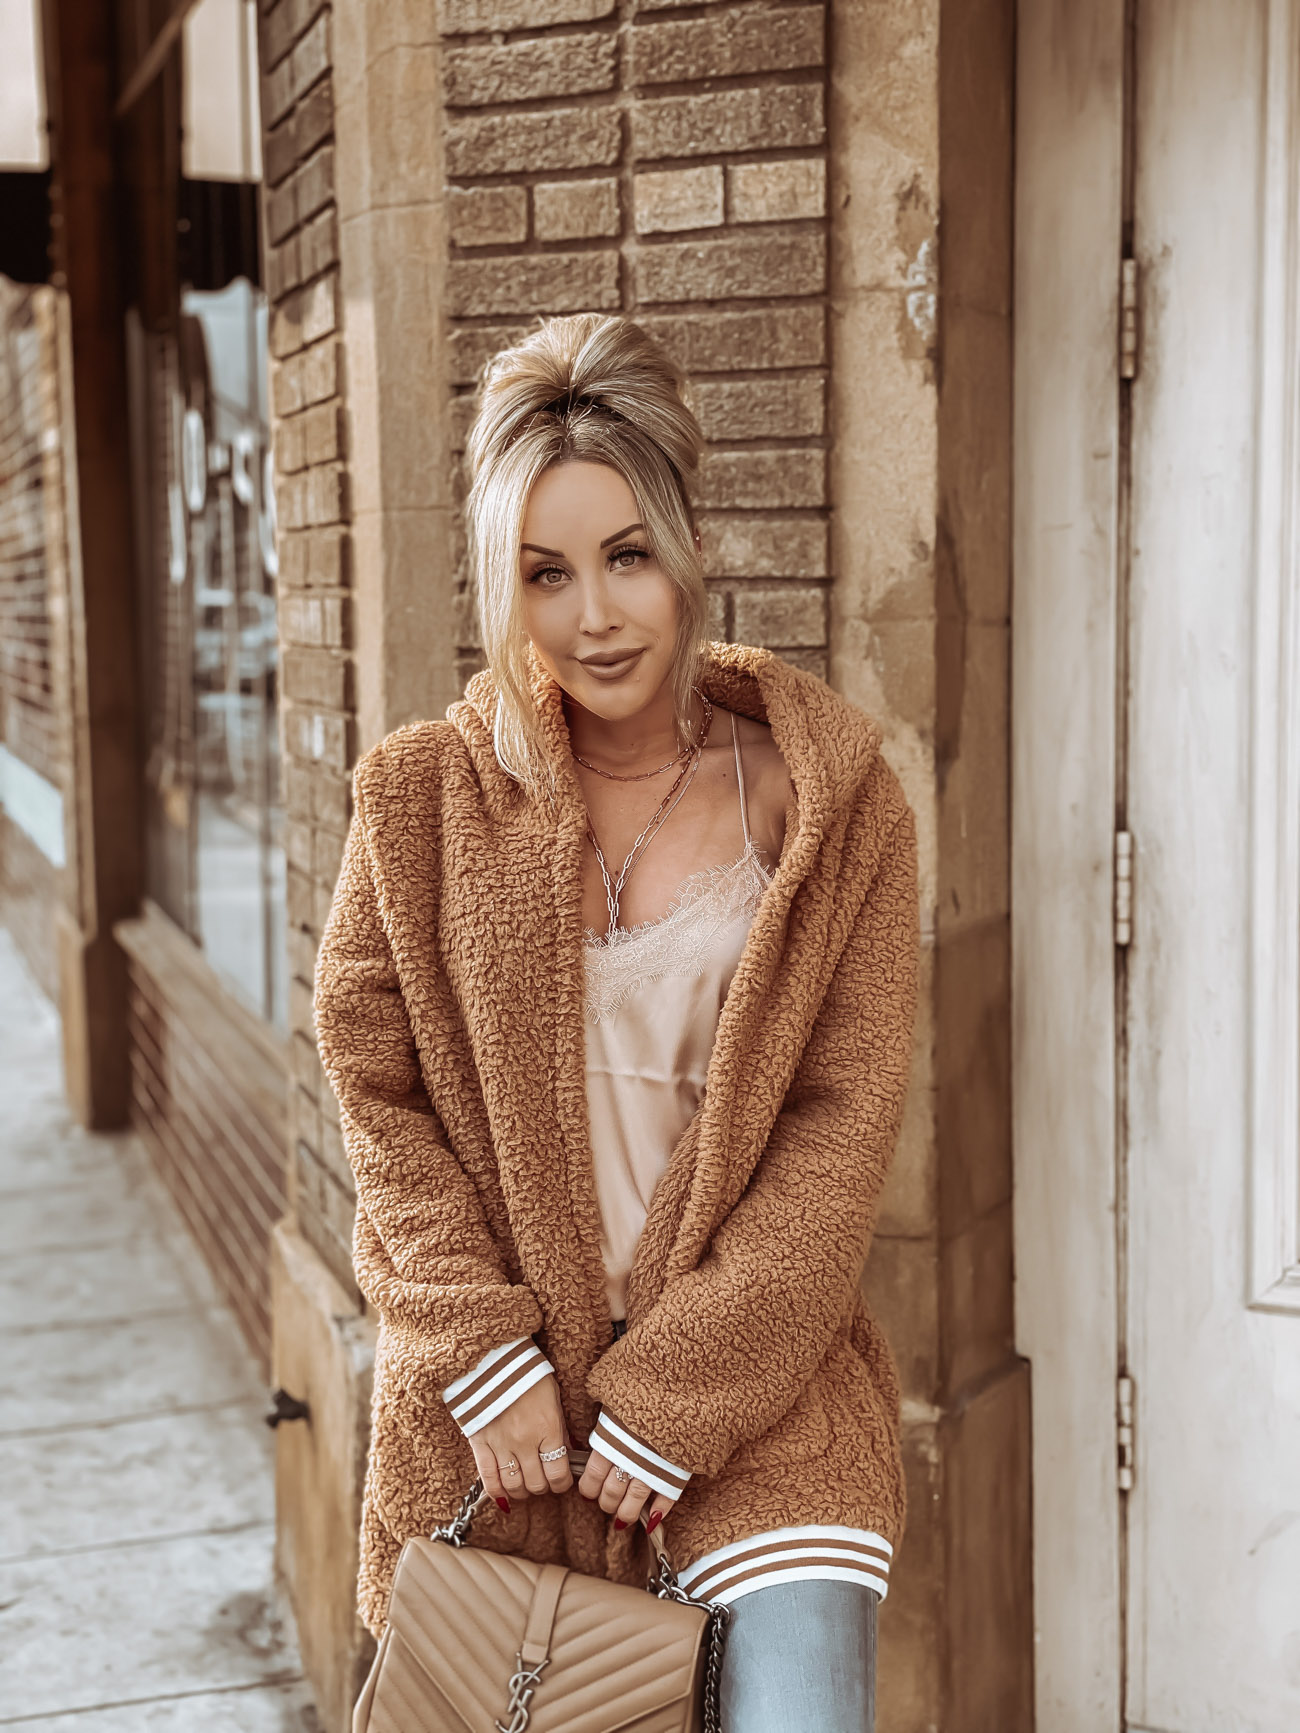 Brown Teddy Coat | Outfit inspo | Street Style | Fall Fashion | Blondie in the City by Hayley Larue